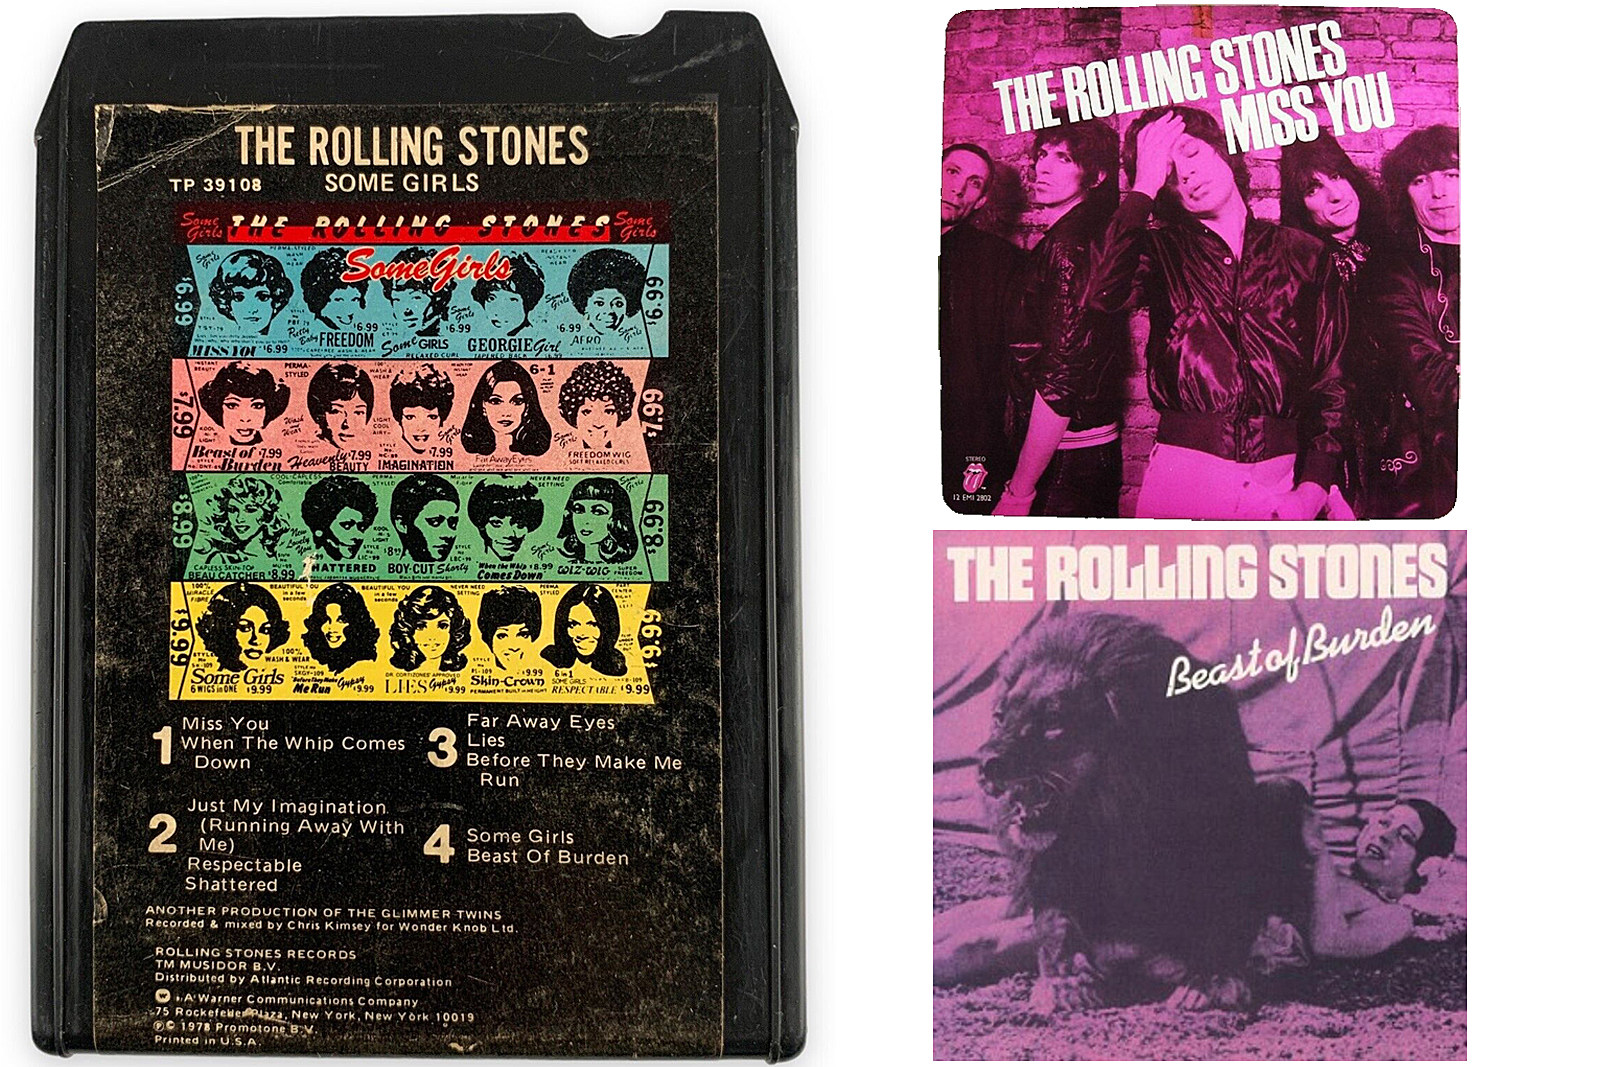 Hear Long-Lost Extended 8-Track Edits of Two Rolling Stones Hits